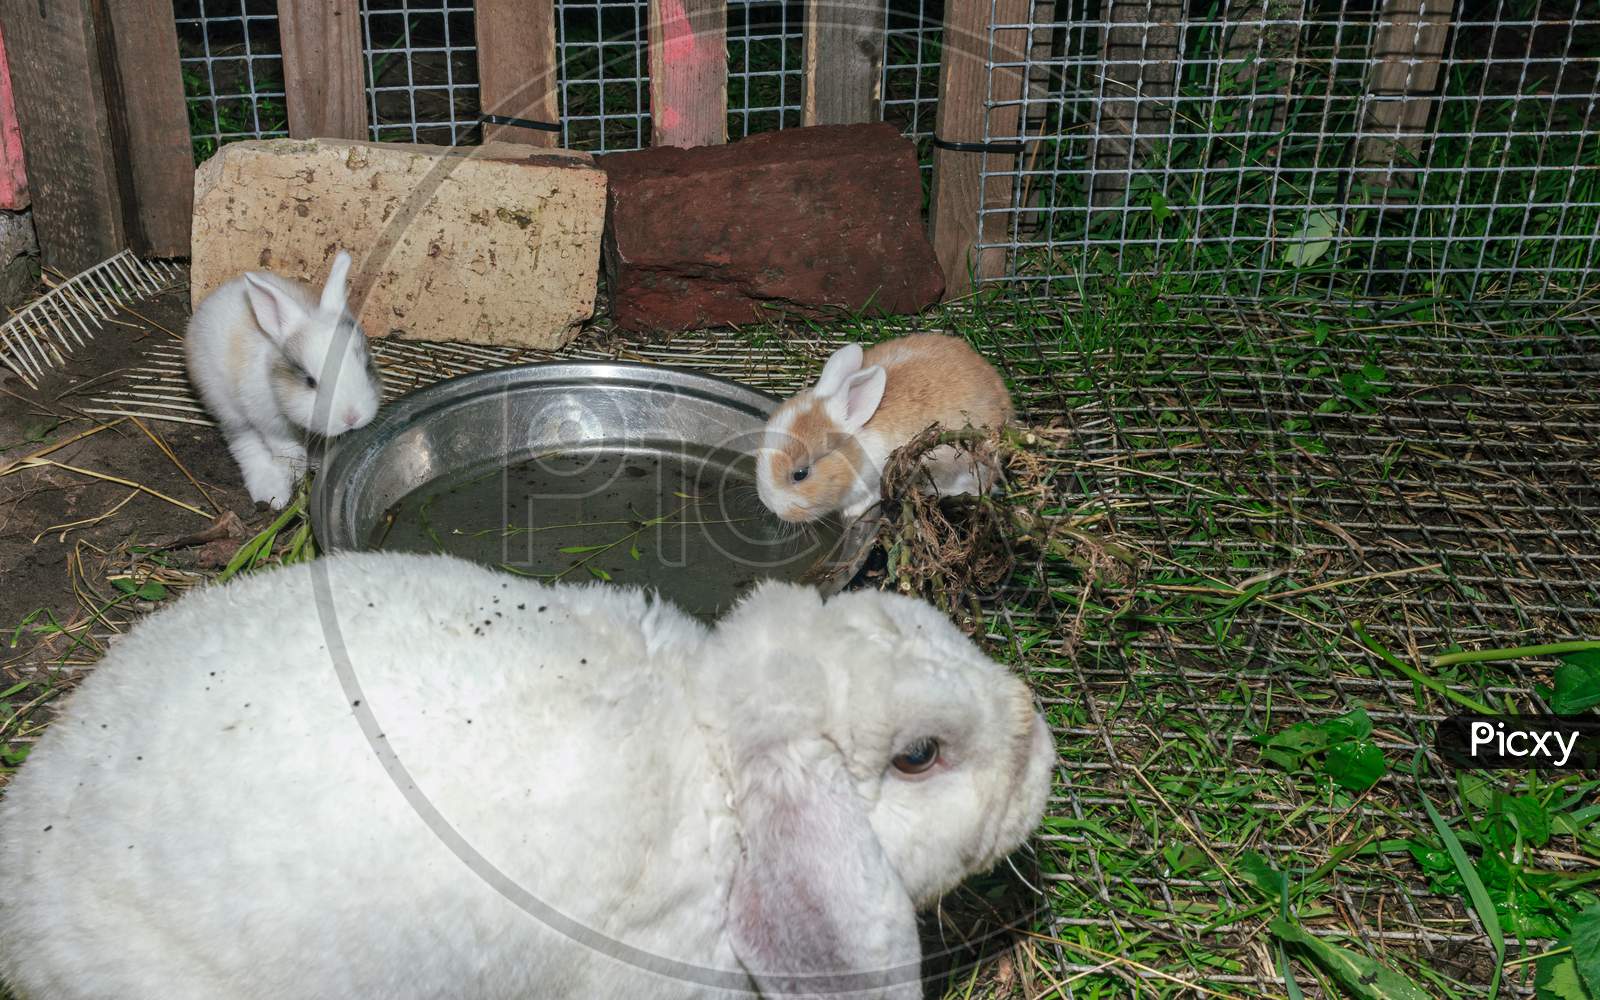 Cute And Fluffy Baby Rabbits Drinking Water